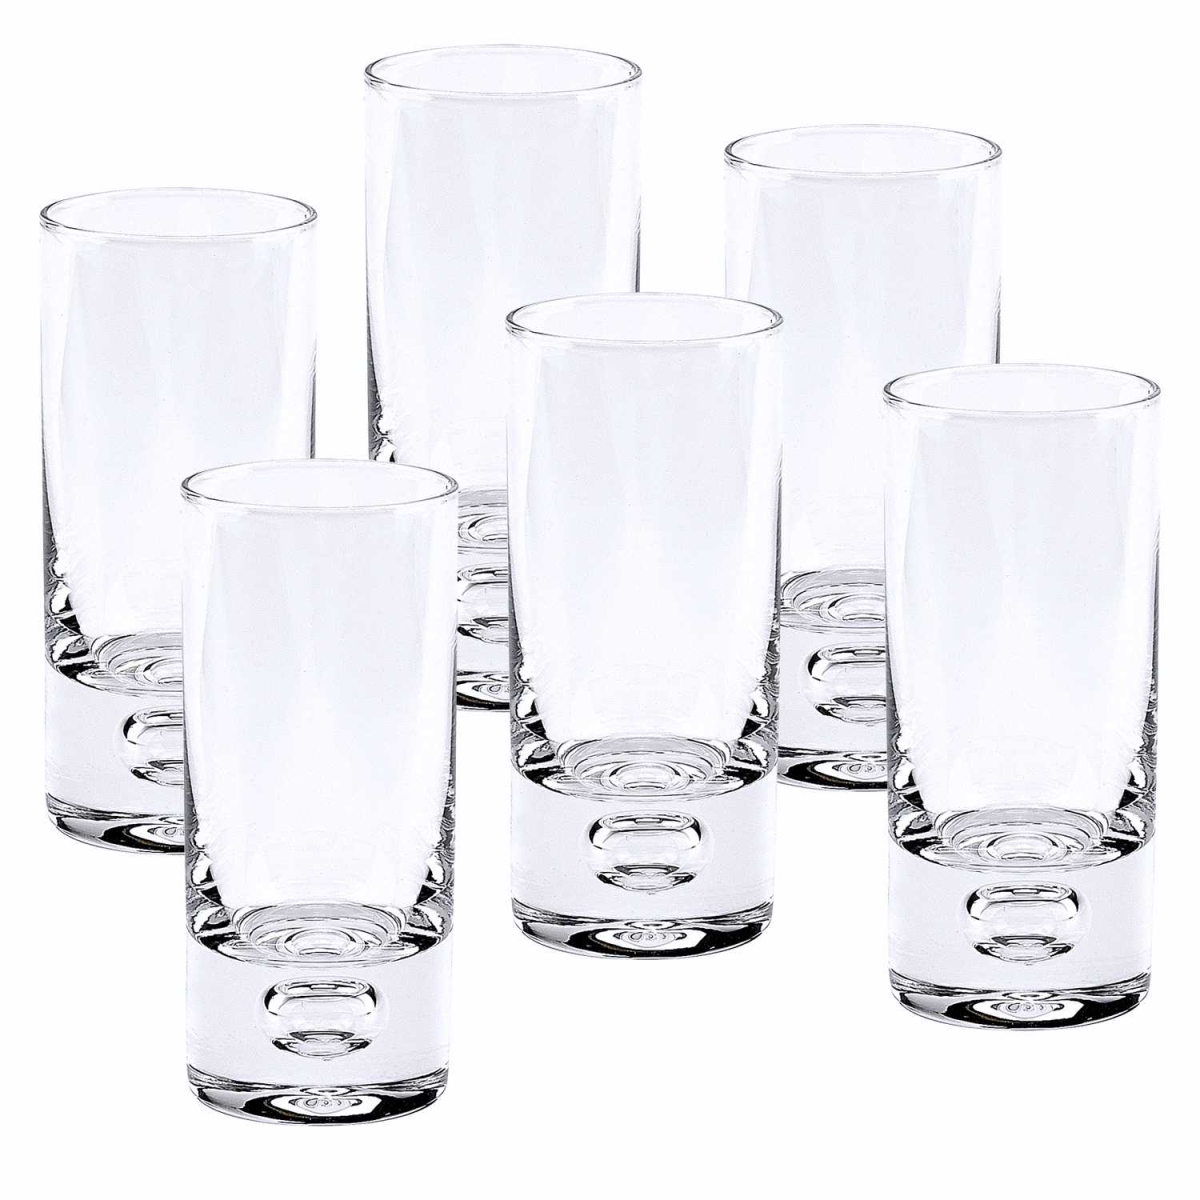 Picture of HomeRoots 375717 3 oz 3 oz Mouth Blown Crystal Shot or Vodka Glass Set, 6 Piece